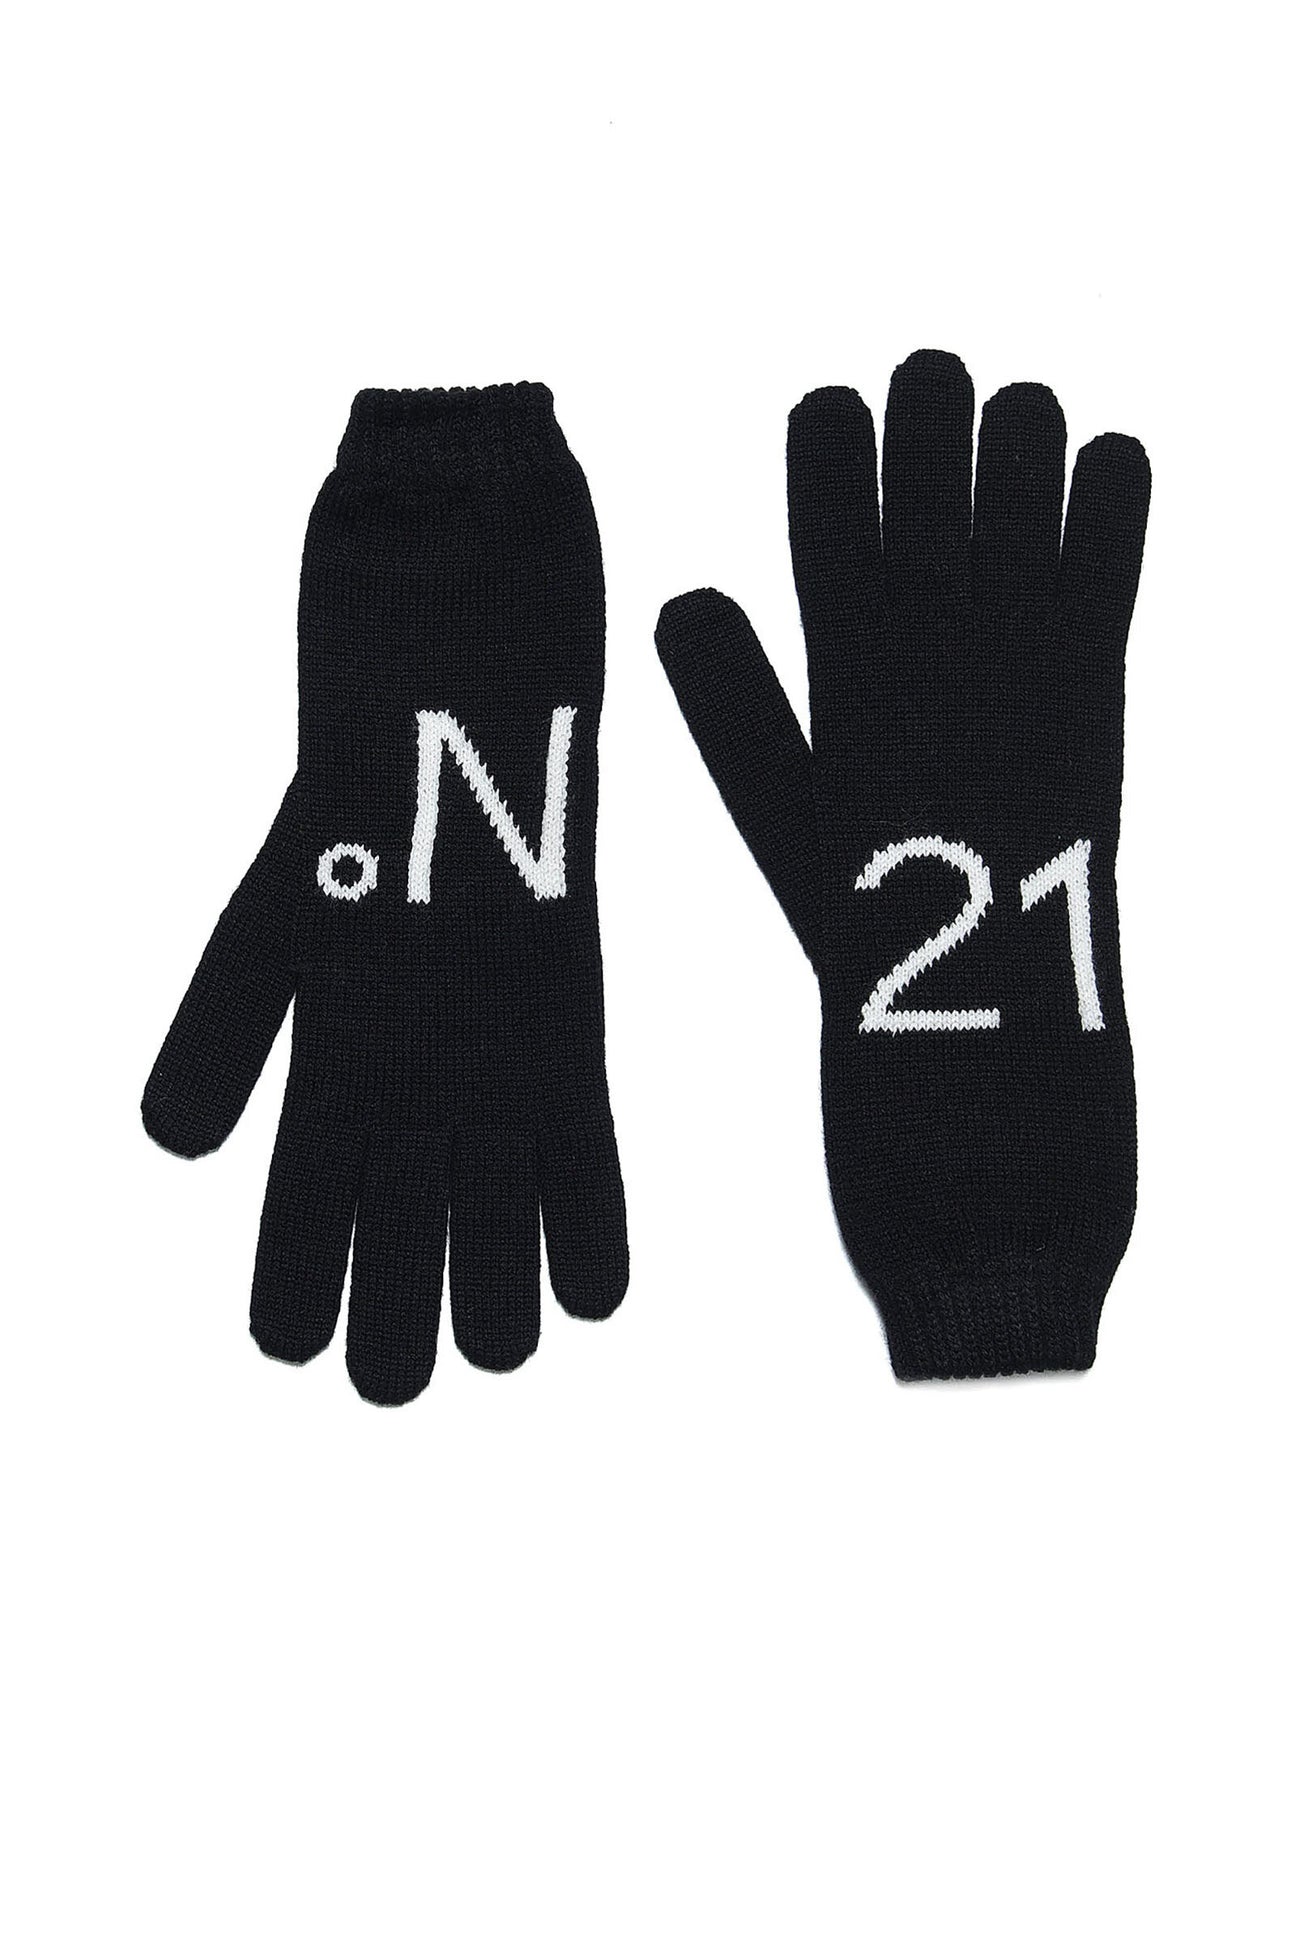 Knit black gloves with logo 